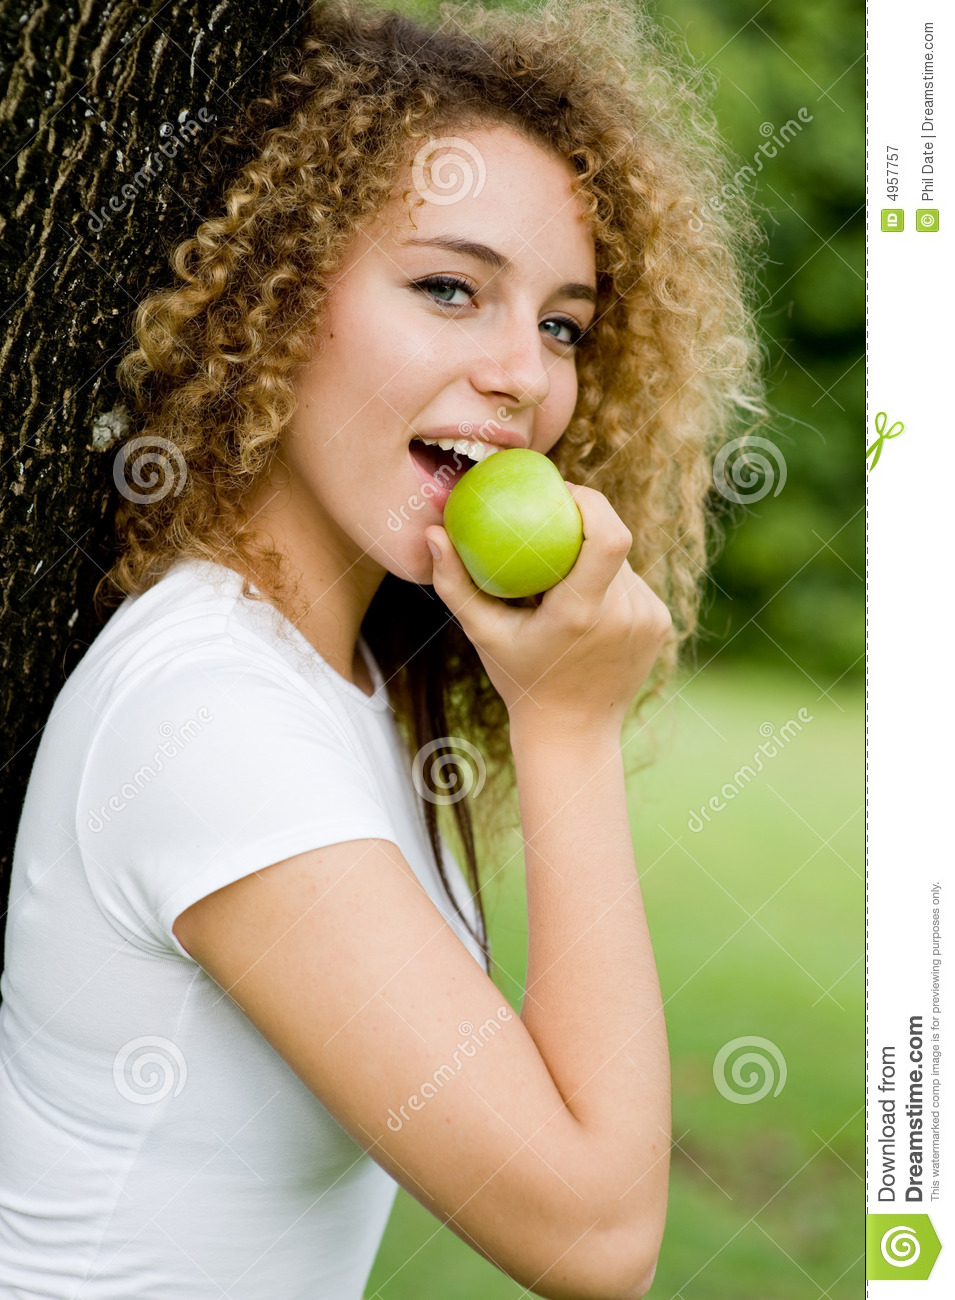 Girl Eating Apple Royalty Free Stock Photography   Image  4957757